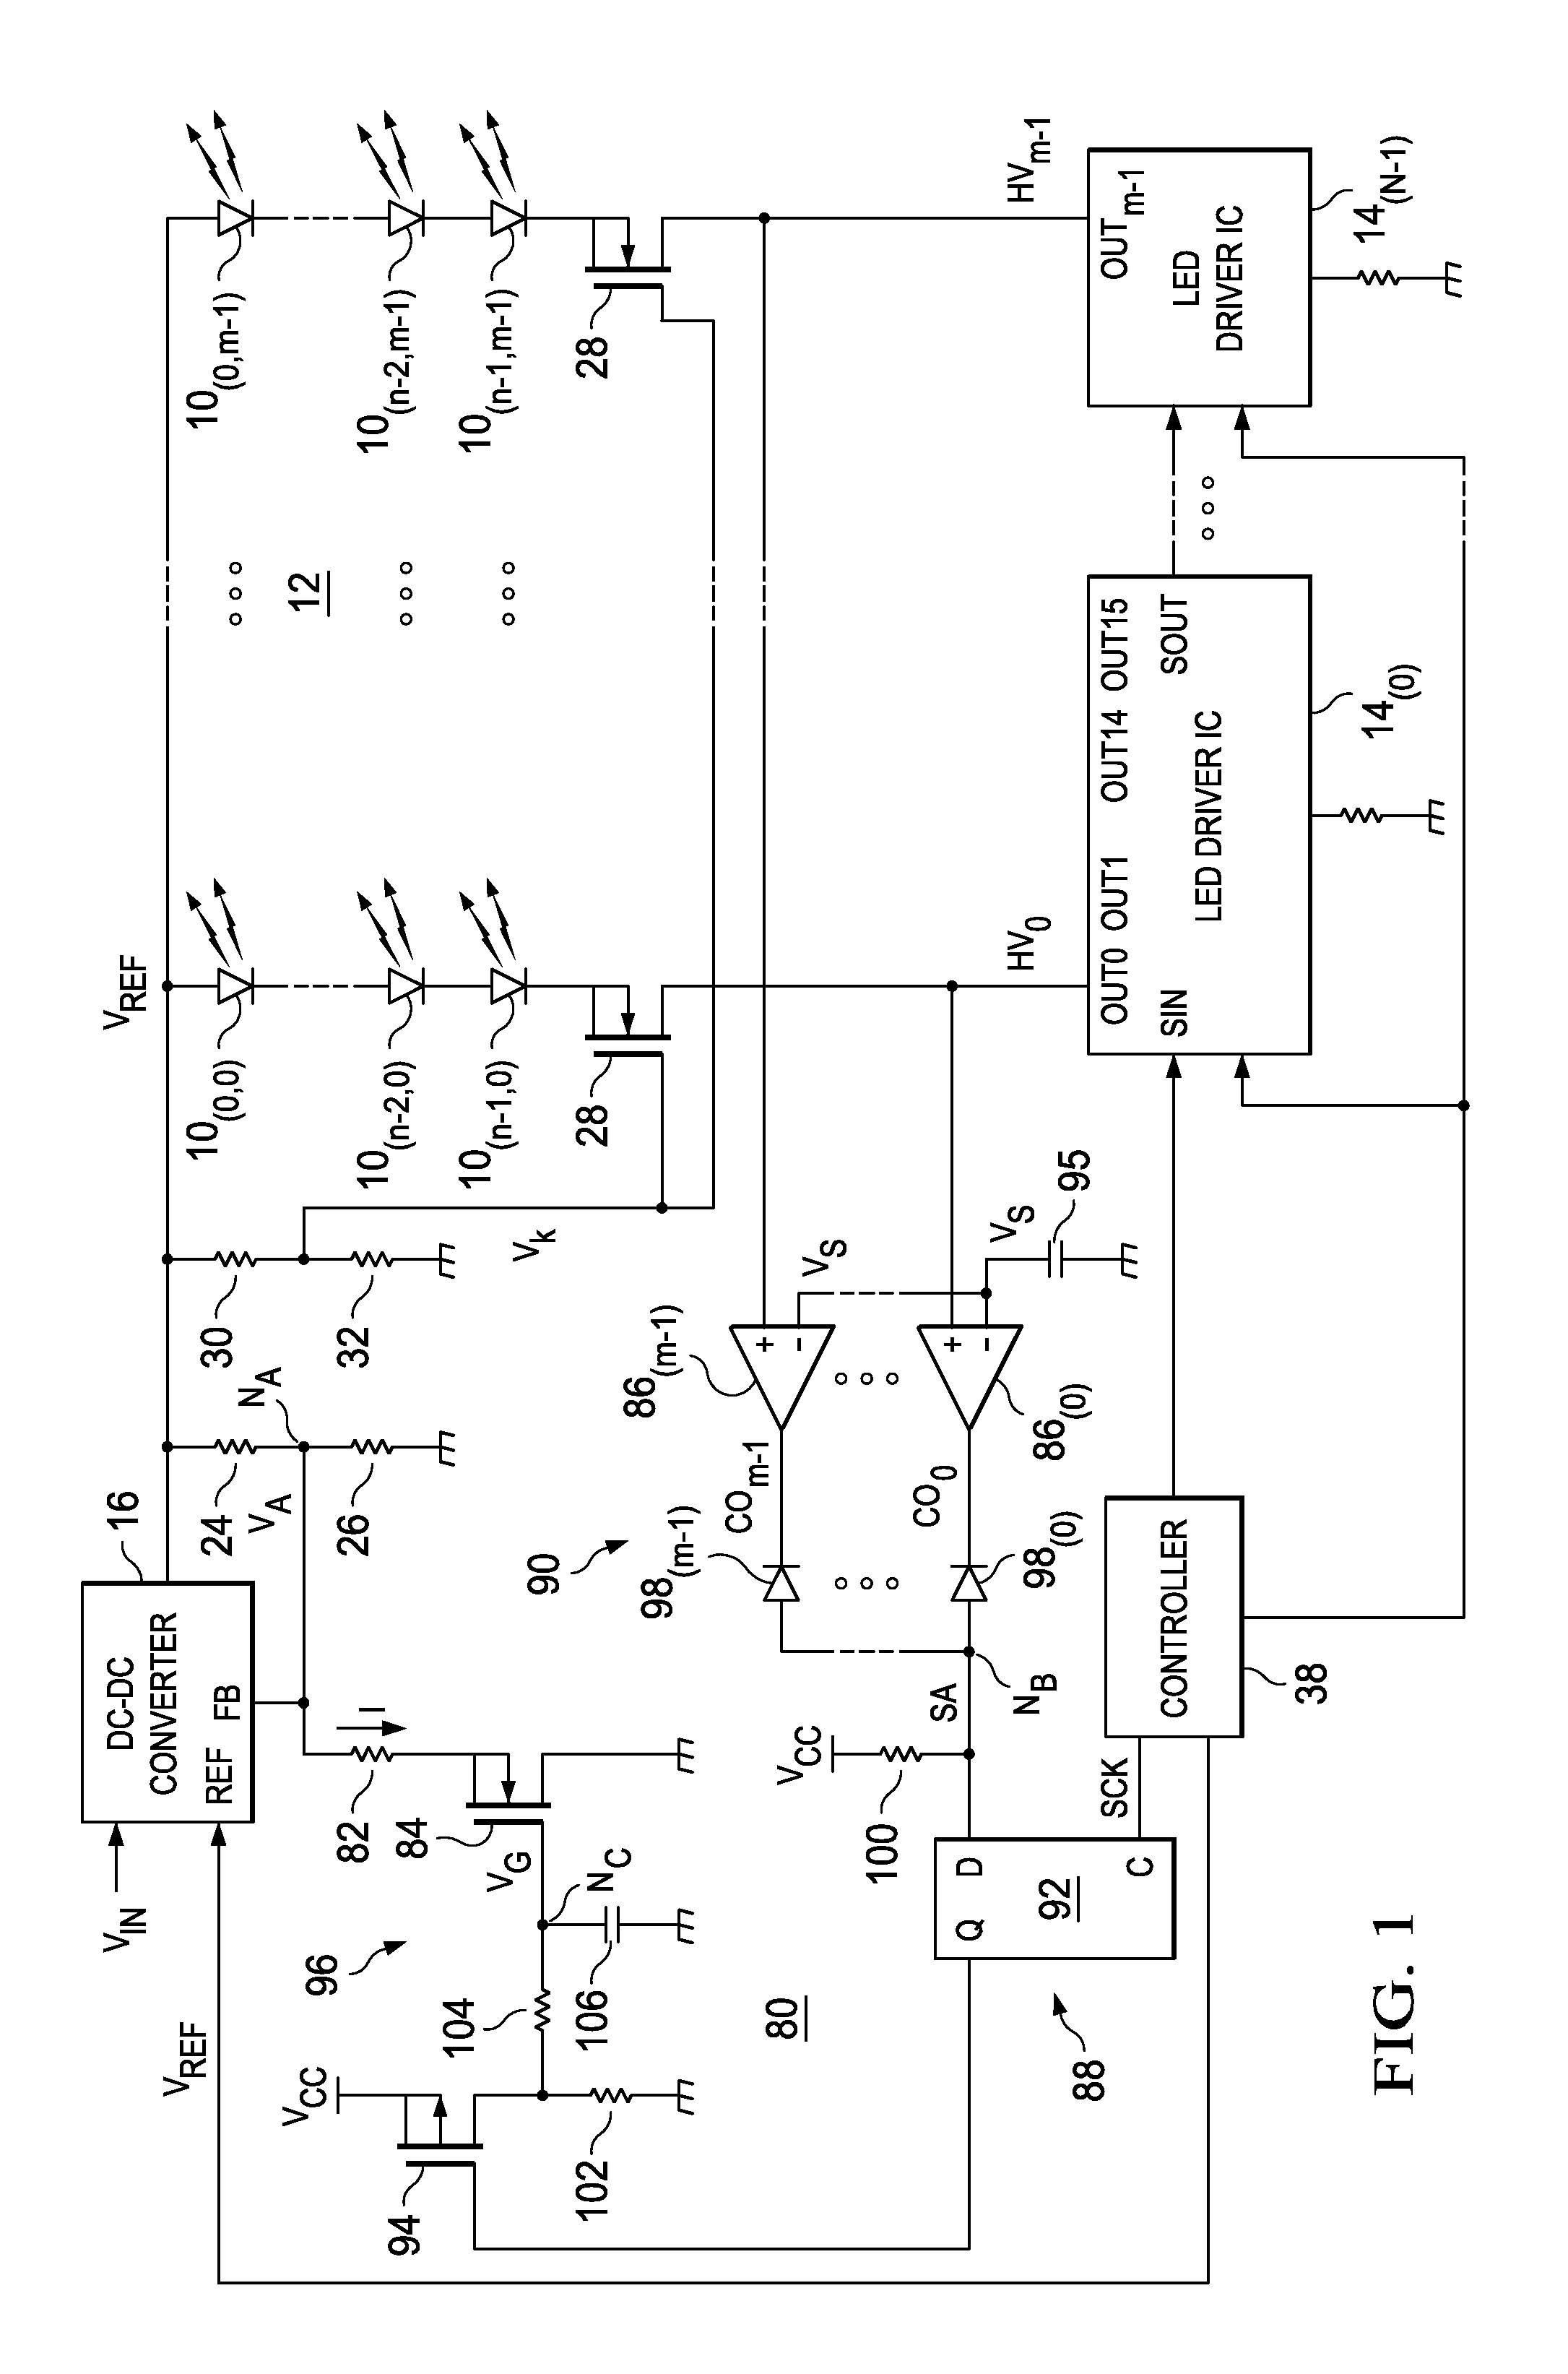 LED device and LED driver